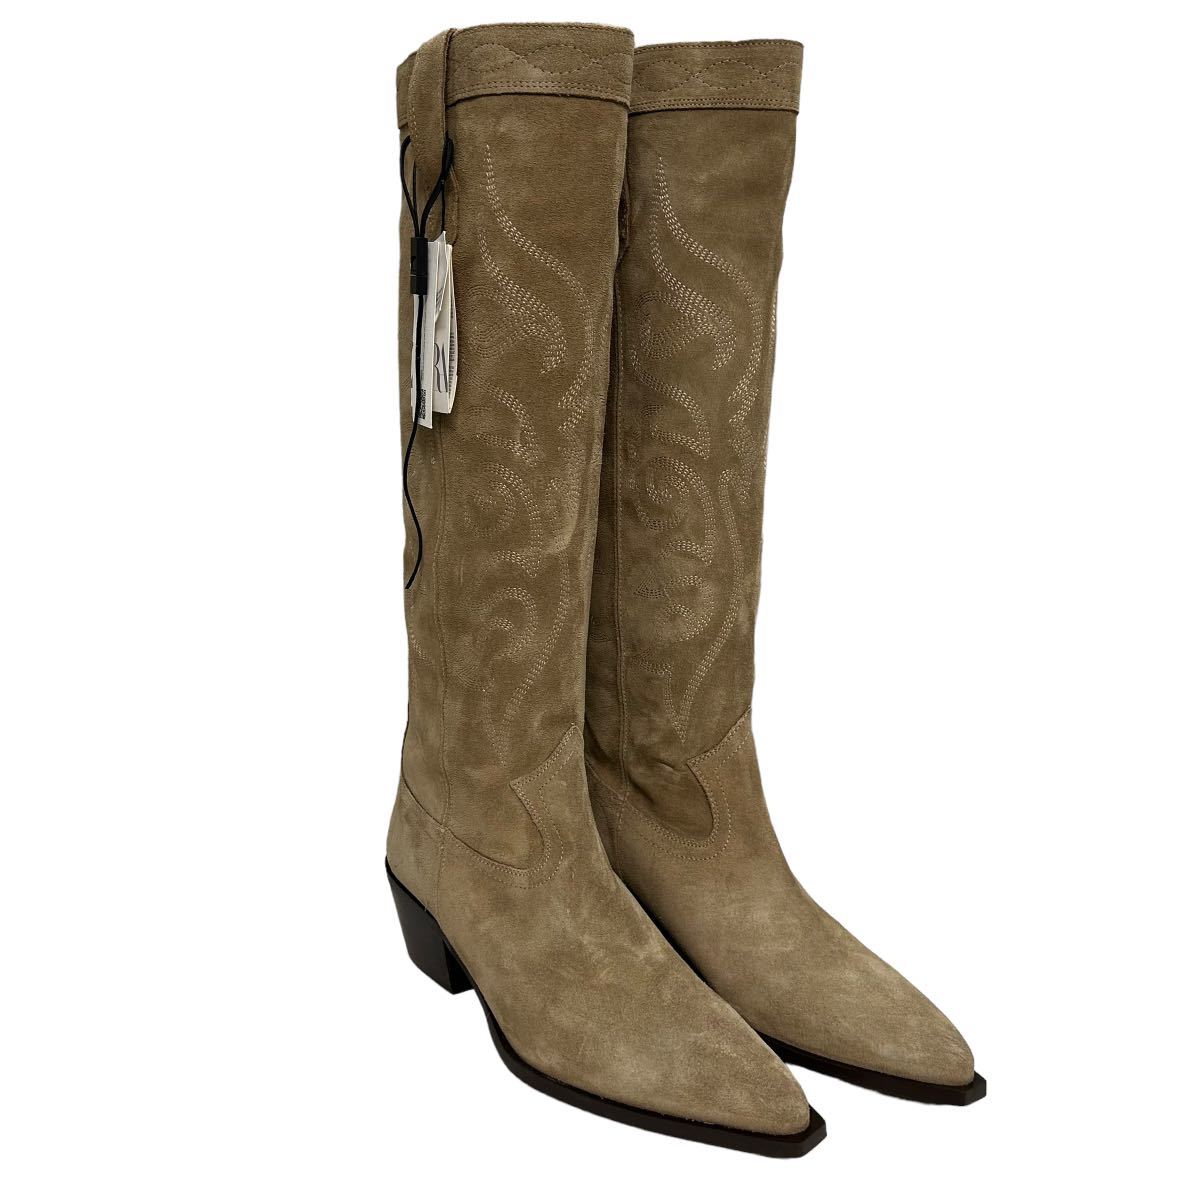 BC099 ZARA Zara lady's long boots 38 approximately 24cm beige suede 